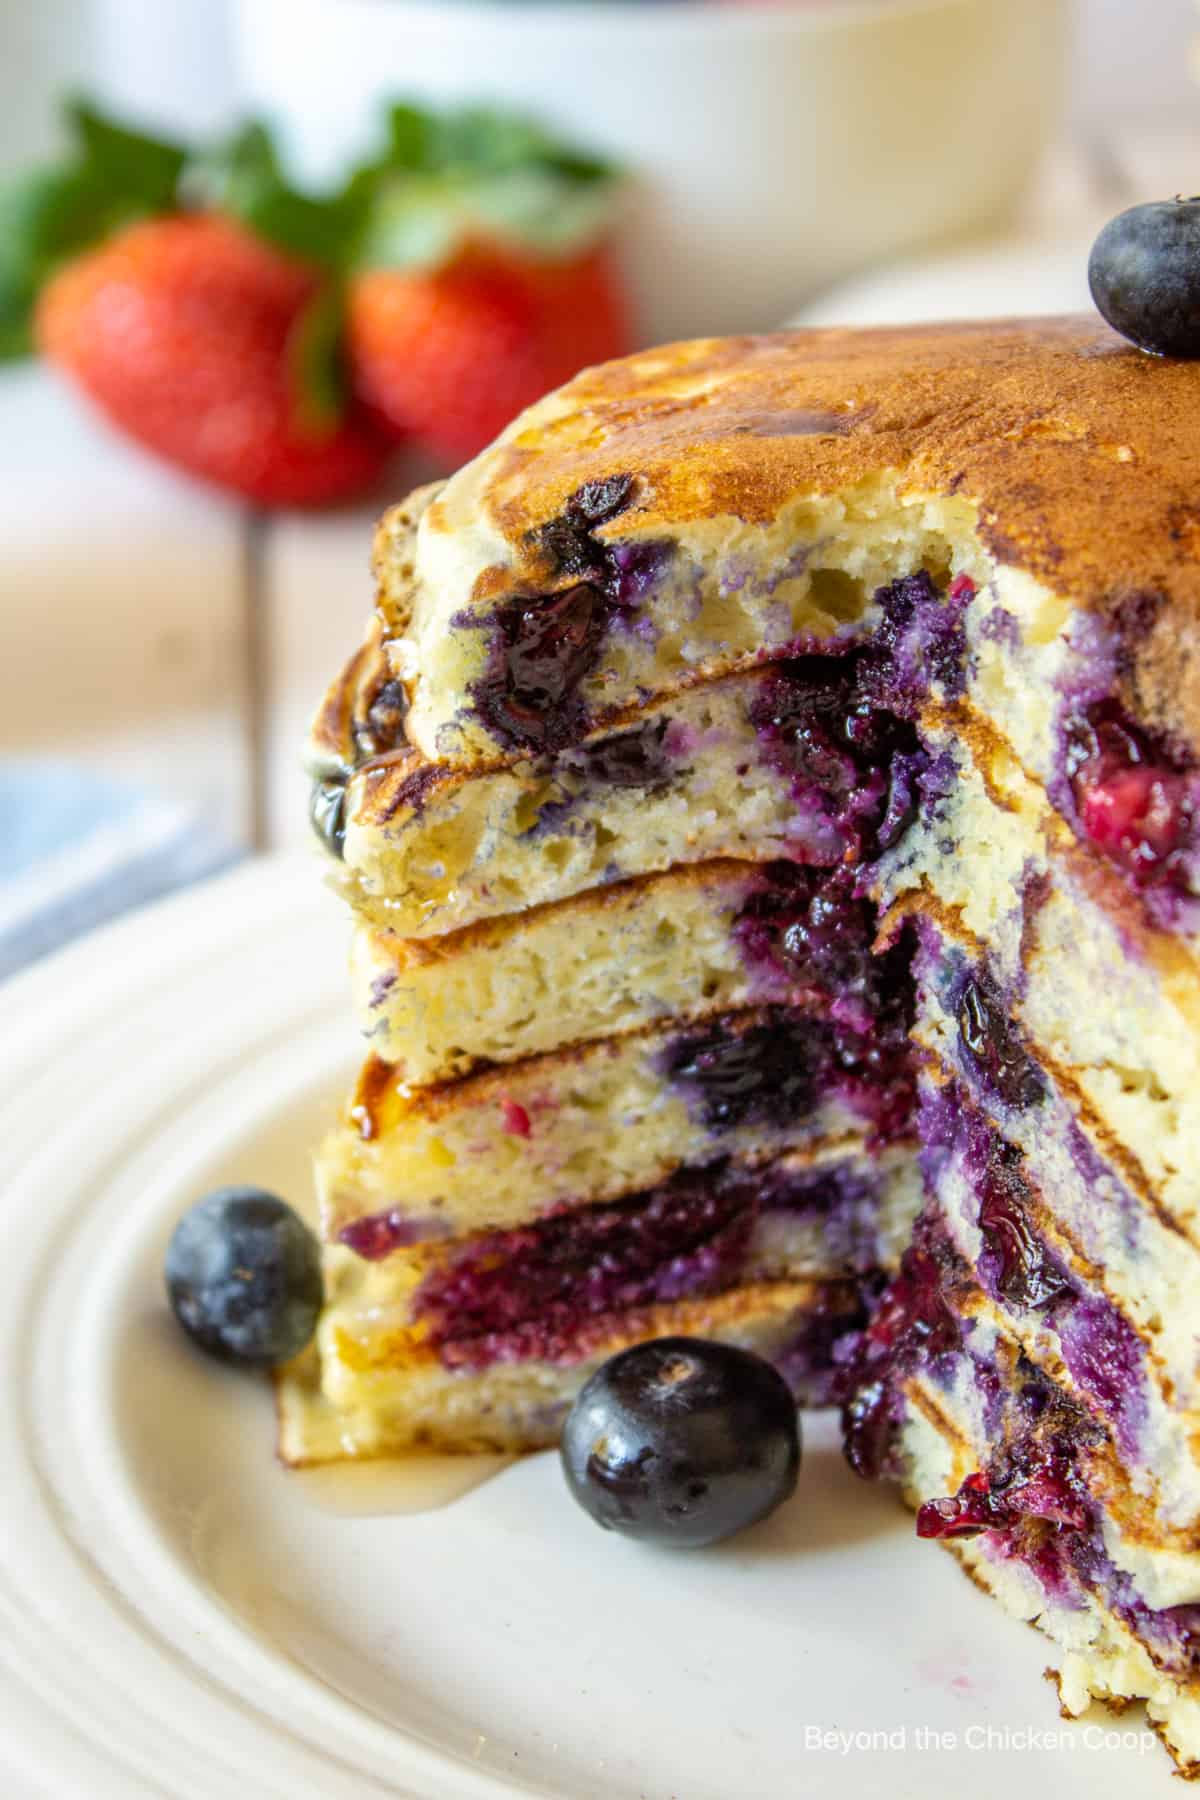 A stack of pancakes filled with blueberries.